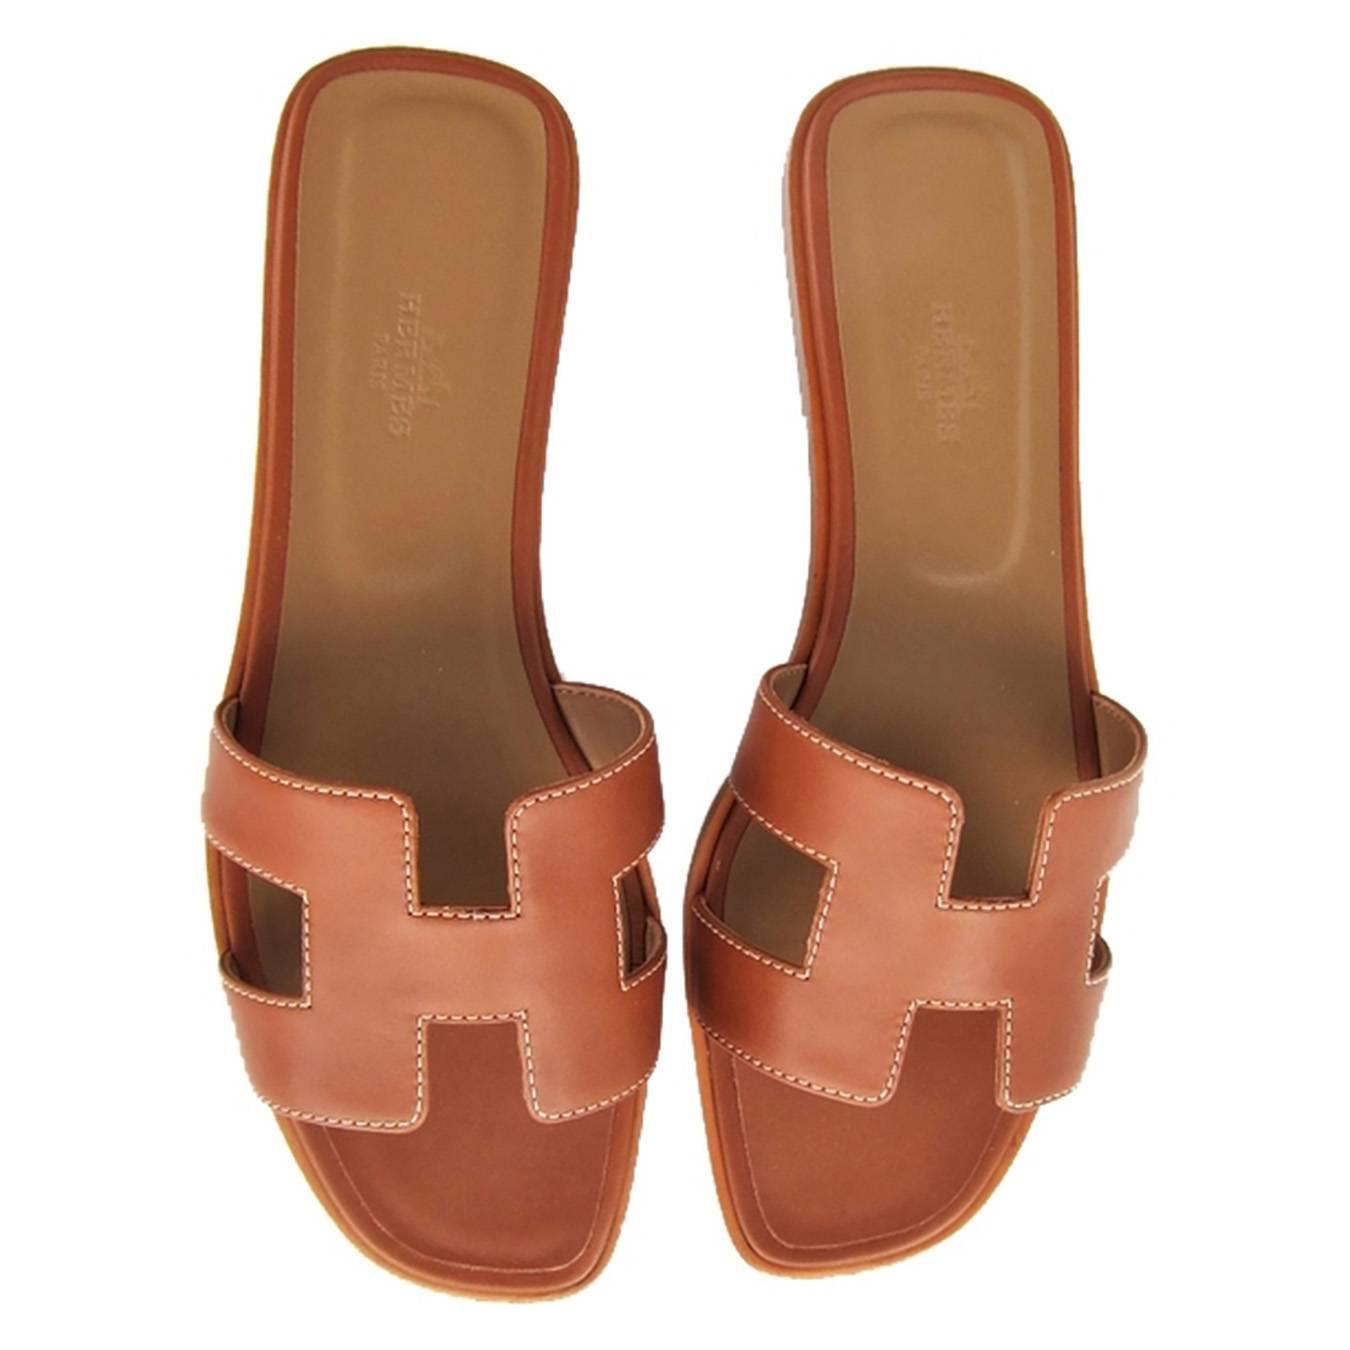 Hermes Gold Oran Box Leather Sandals Shoes Size 40 or 3.9 Iconic at 1stdibs